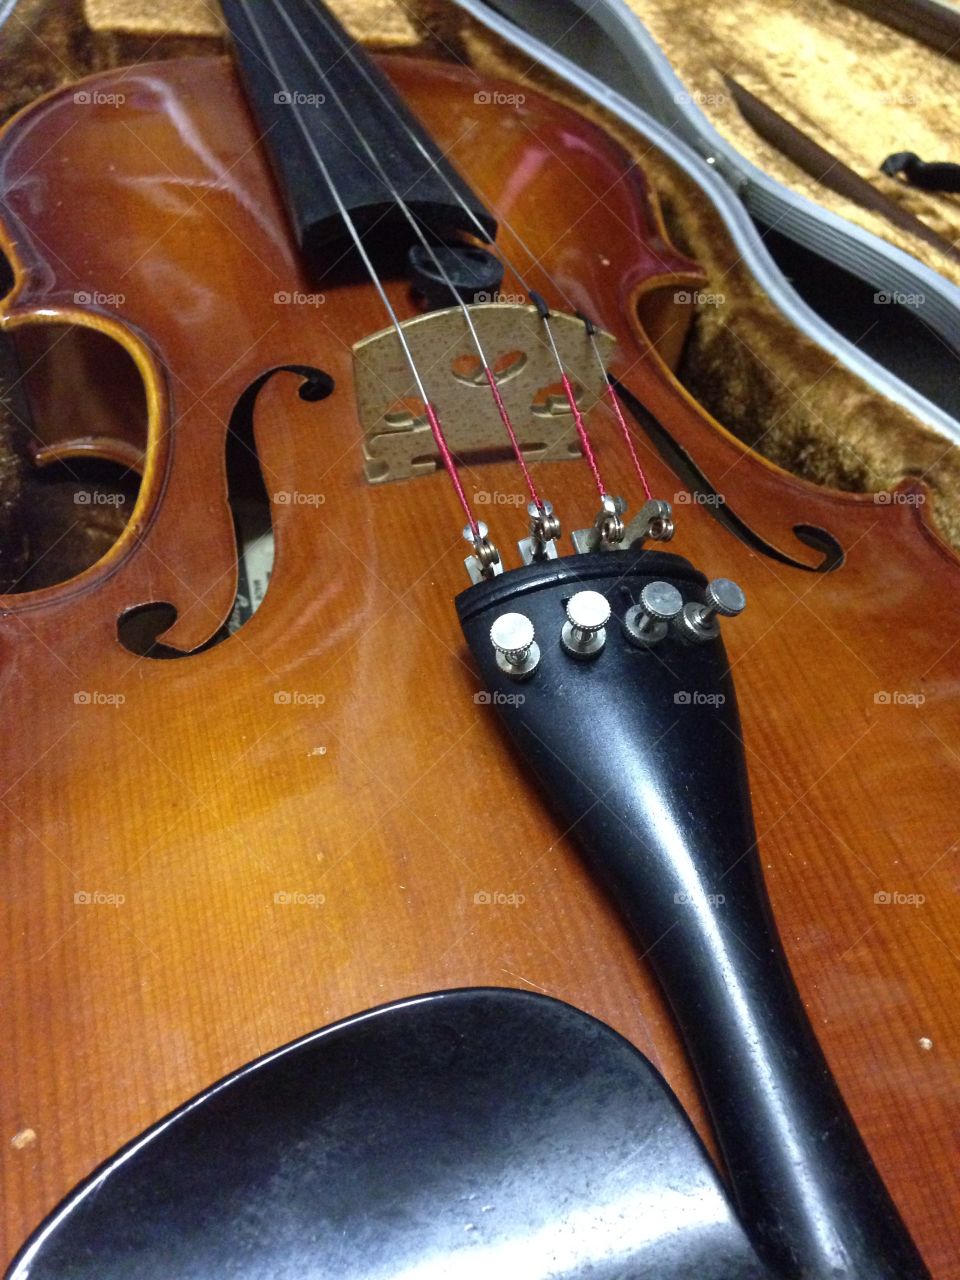 For love of a violin. Close up of a violin